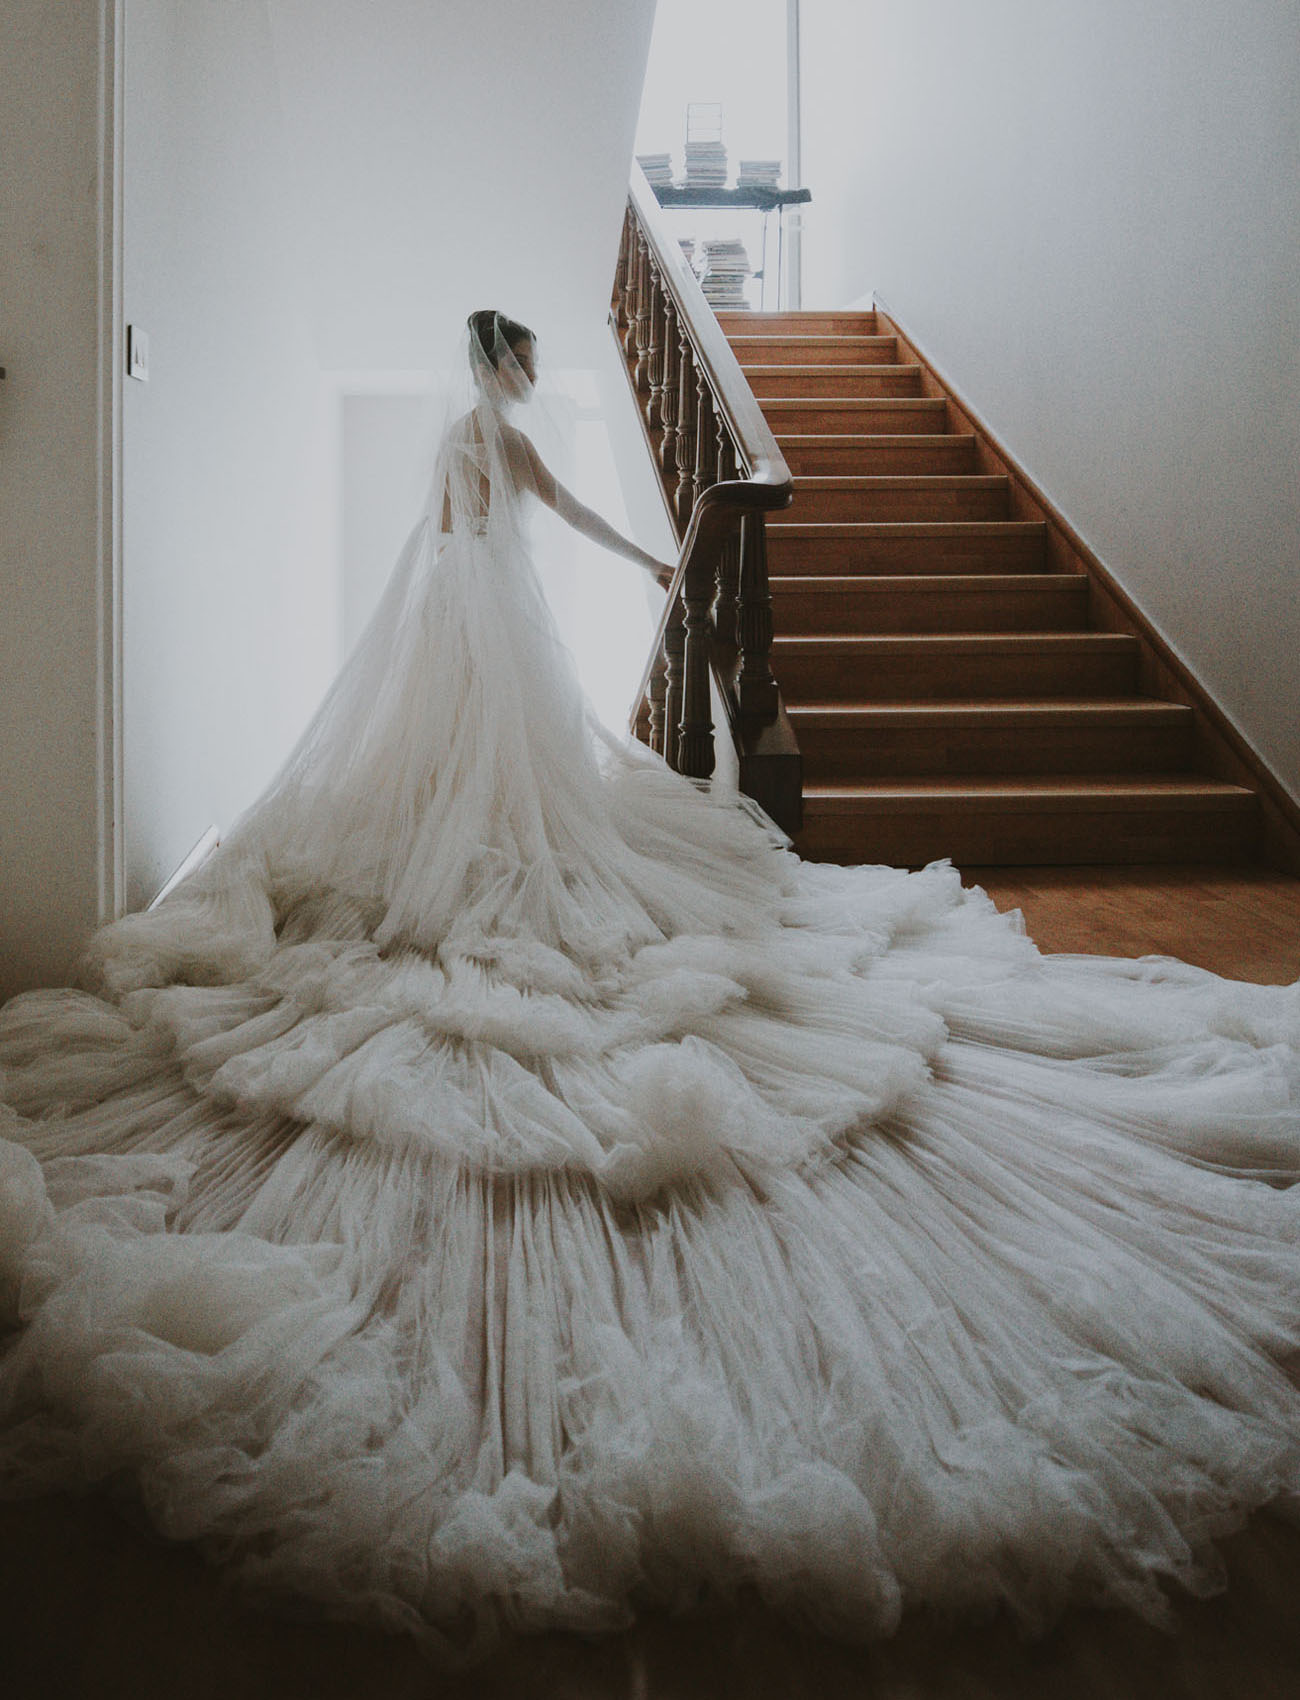 There was a super long train and a long veil that create a literal cloud around her